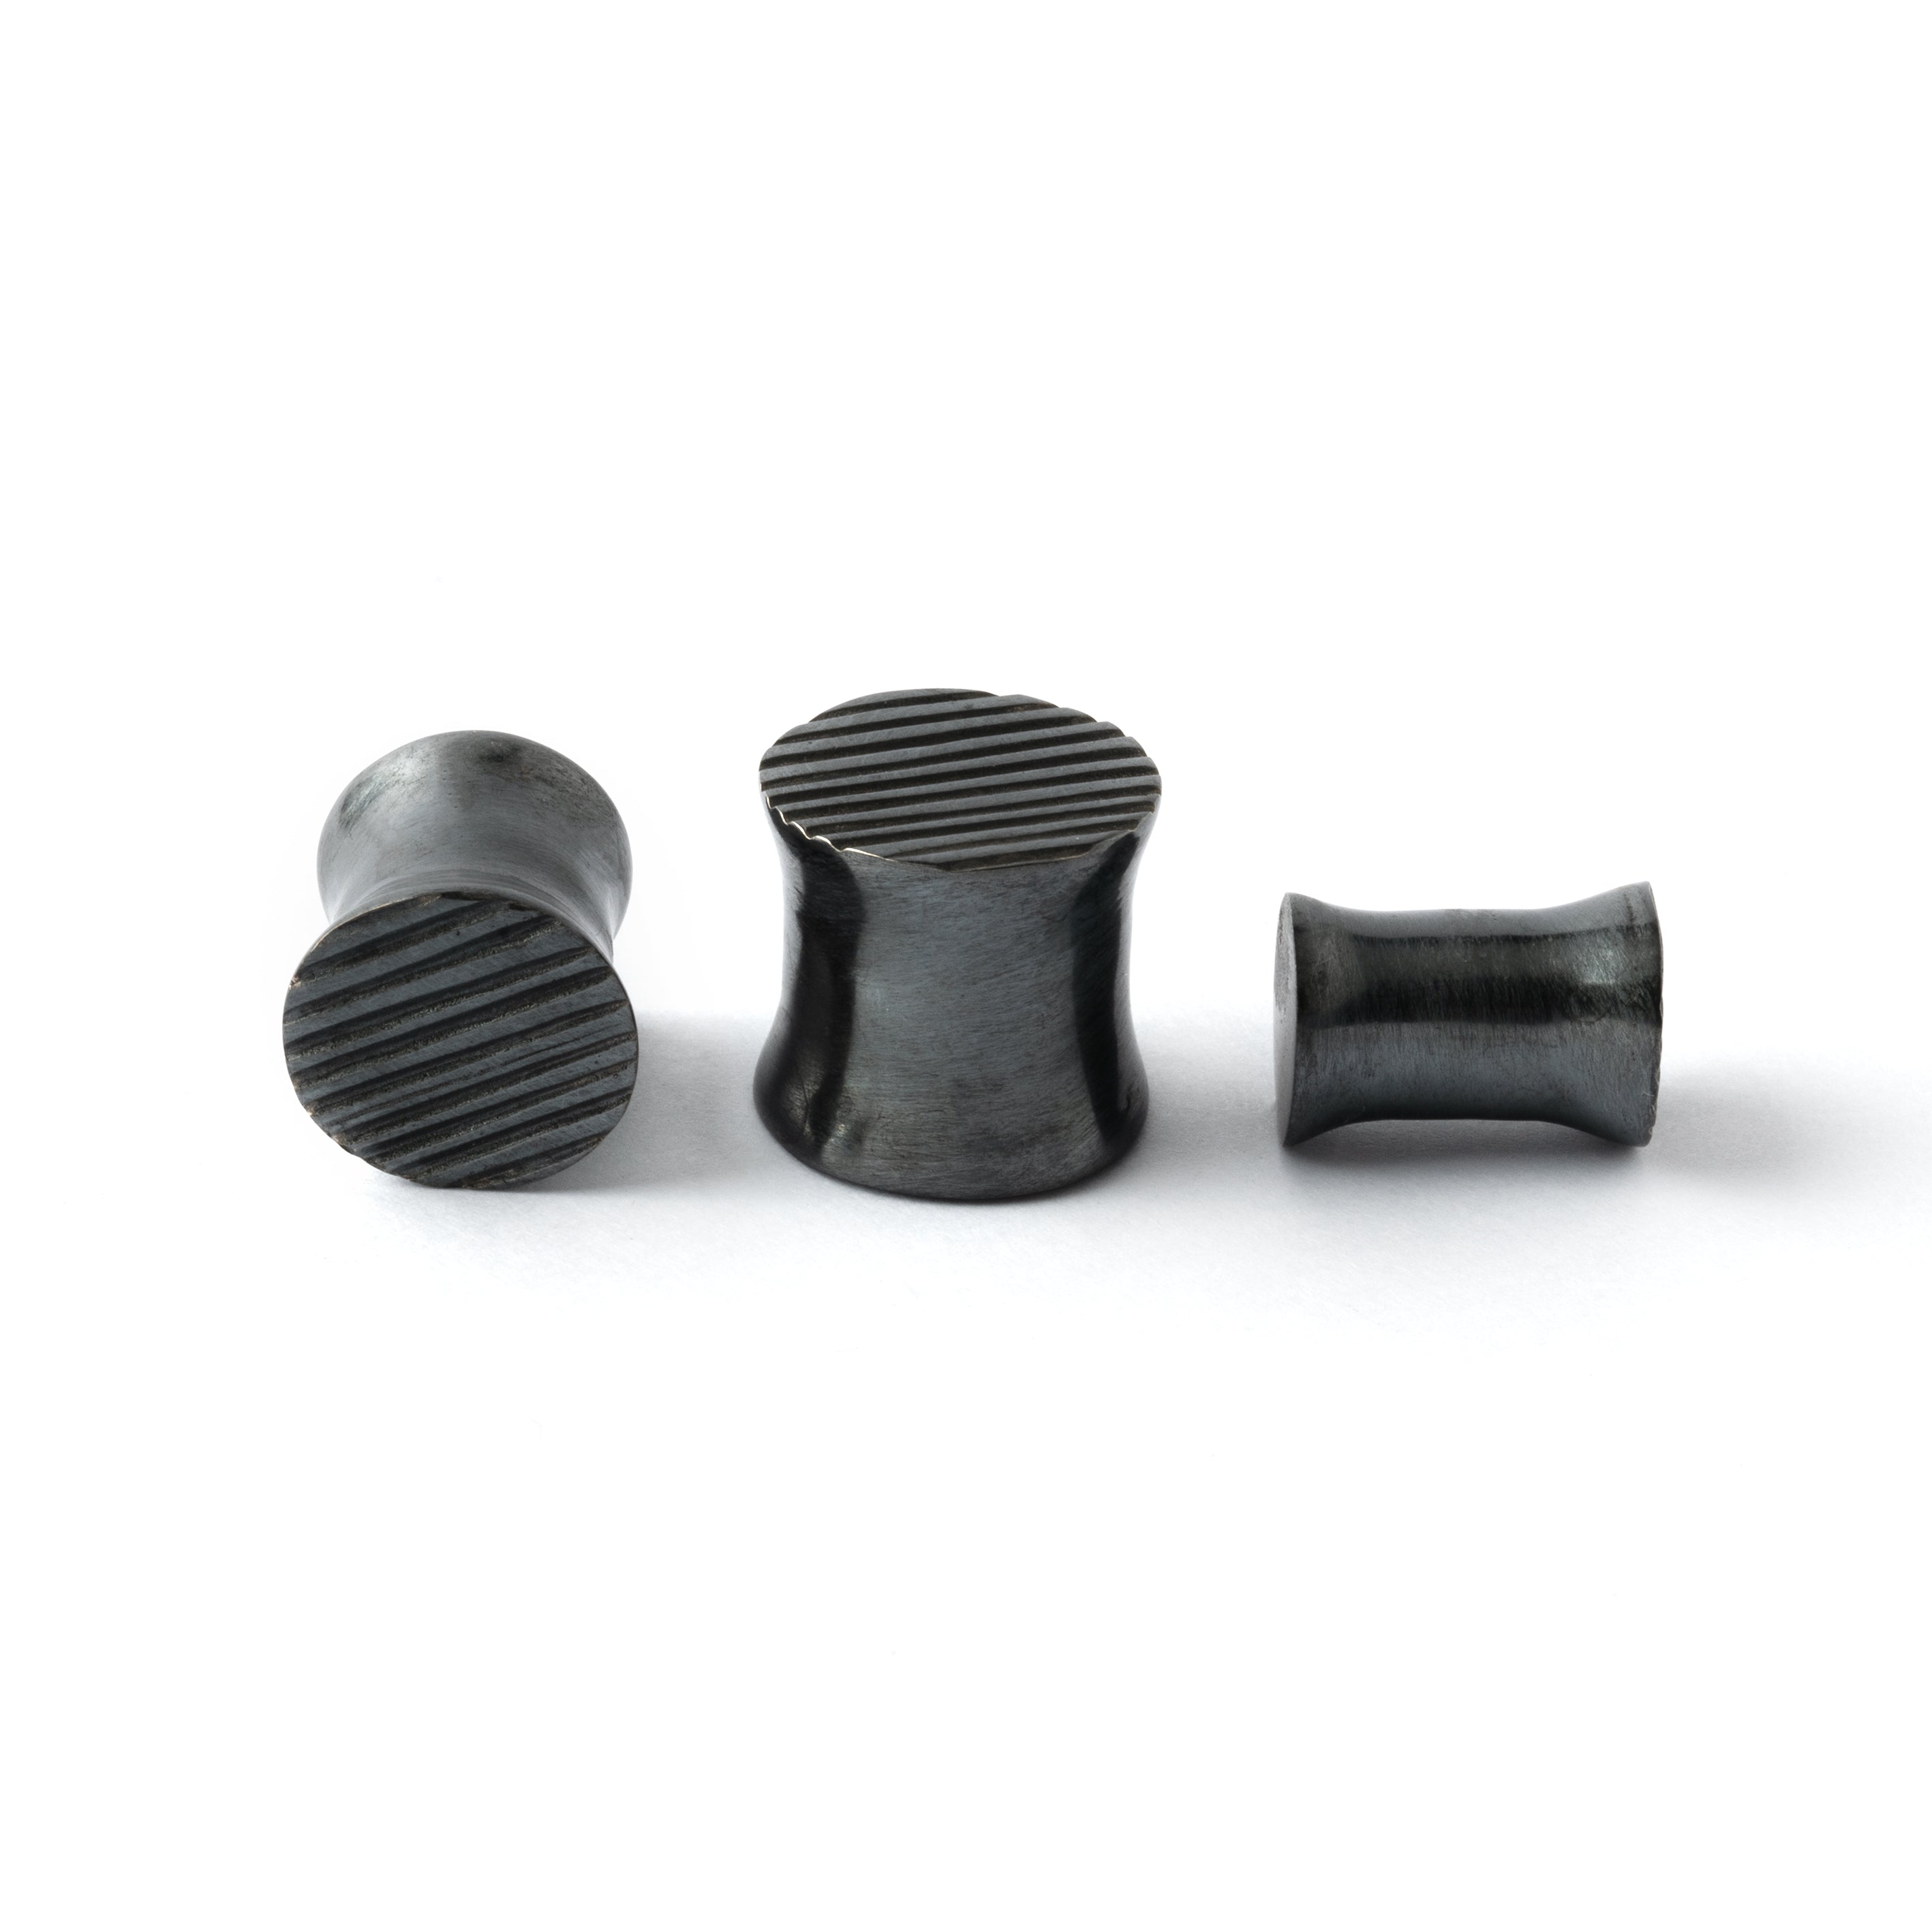 several sizes of double flared black silver scratched ear plugs front and side view